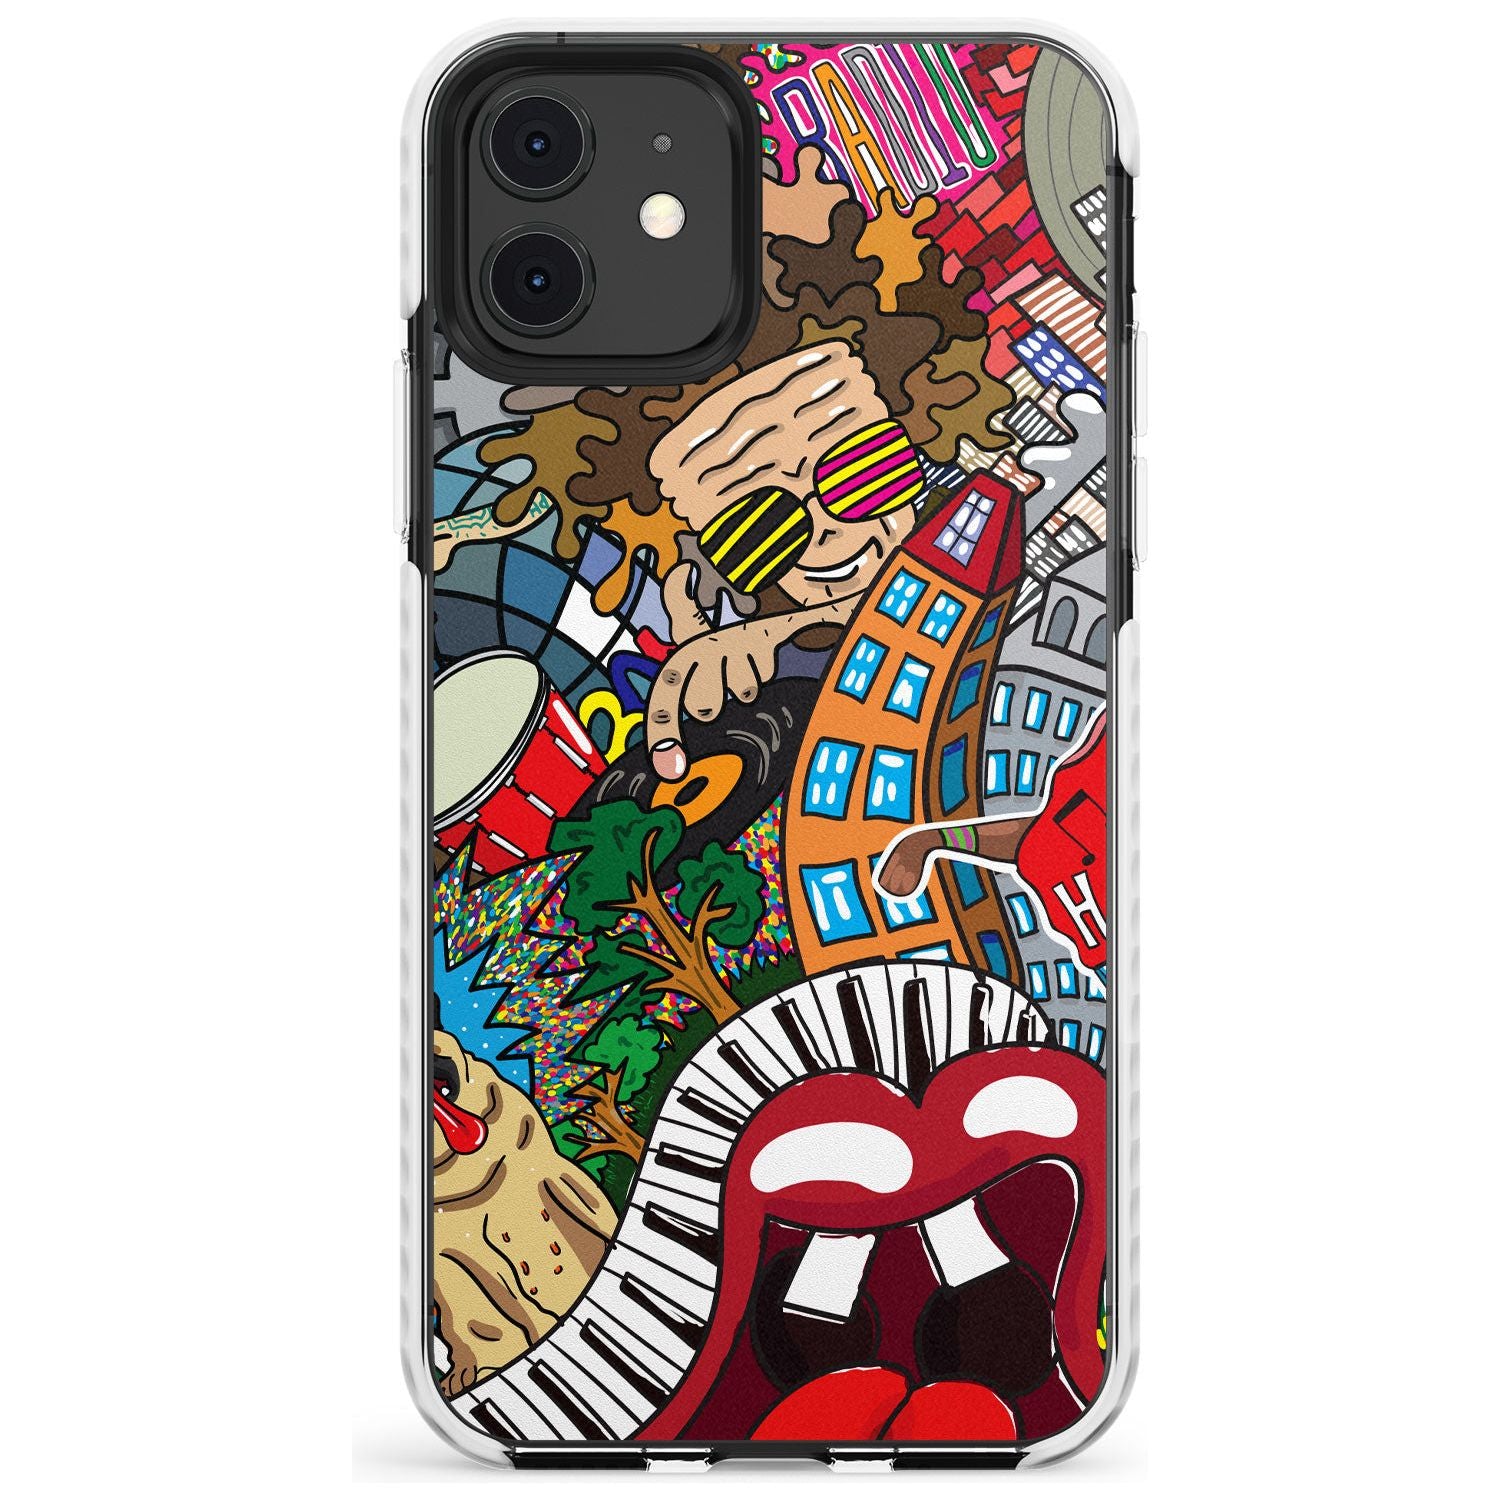 Noise Complaint Slim TPU Phone Case for iPhone 11